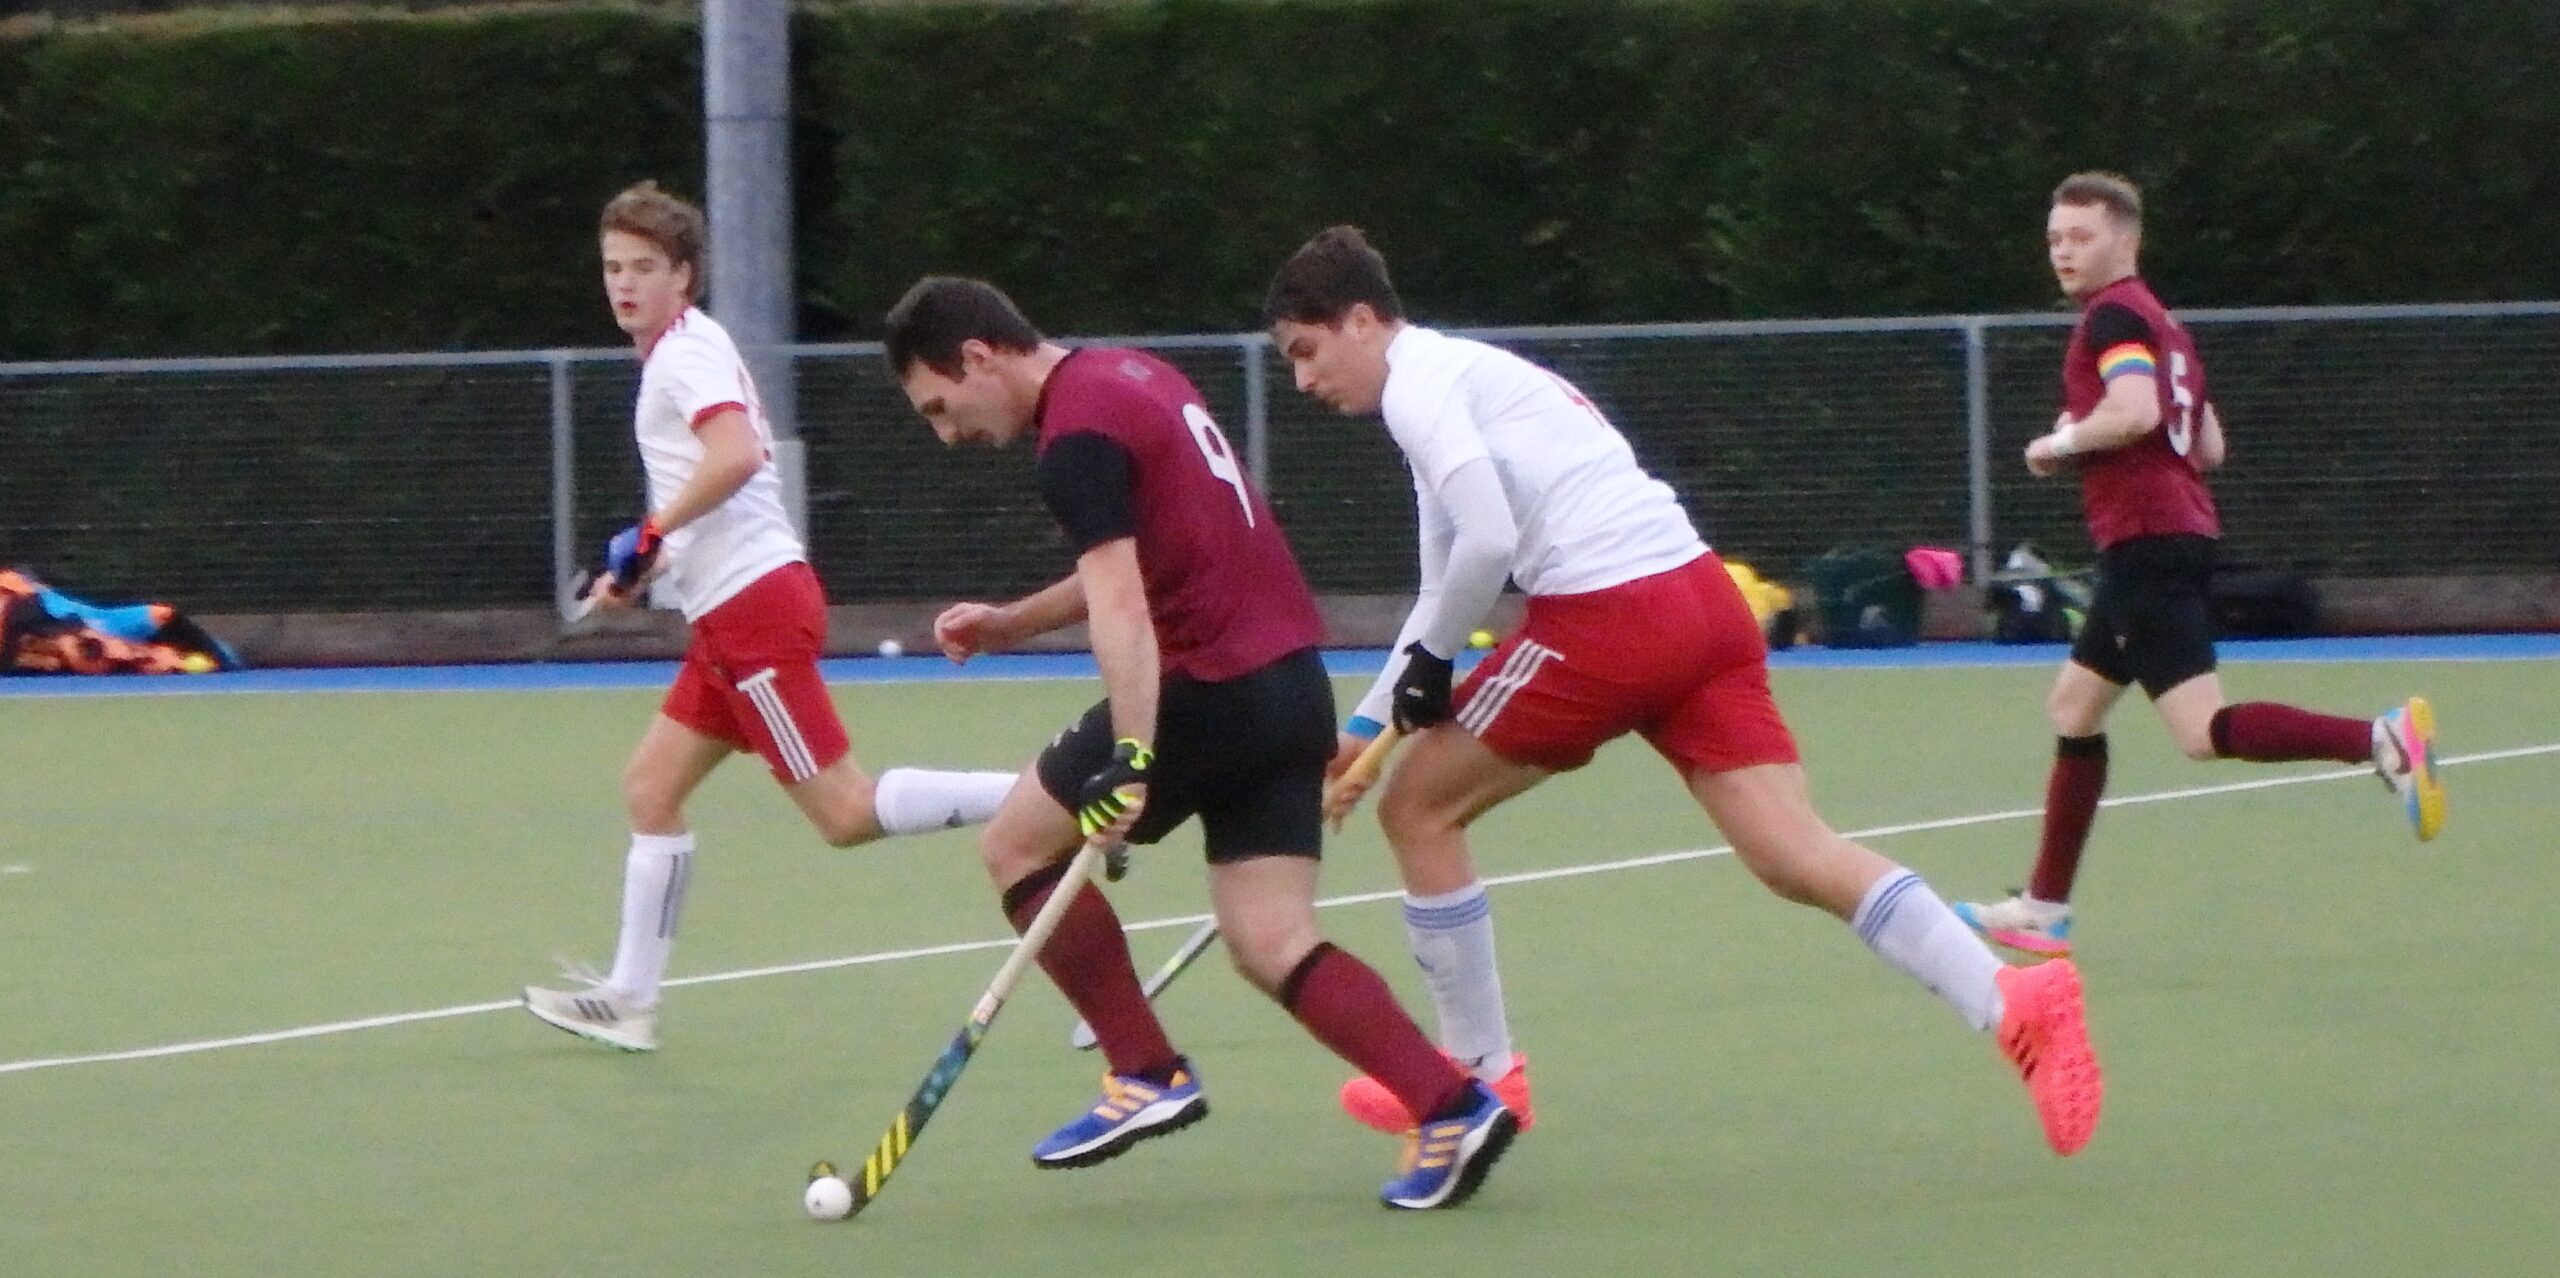 M3s in Last Gasp Draw to Marlow